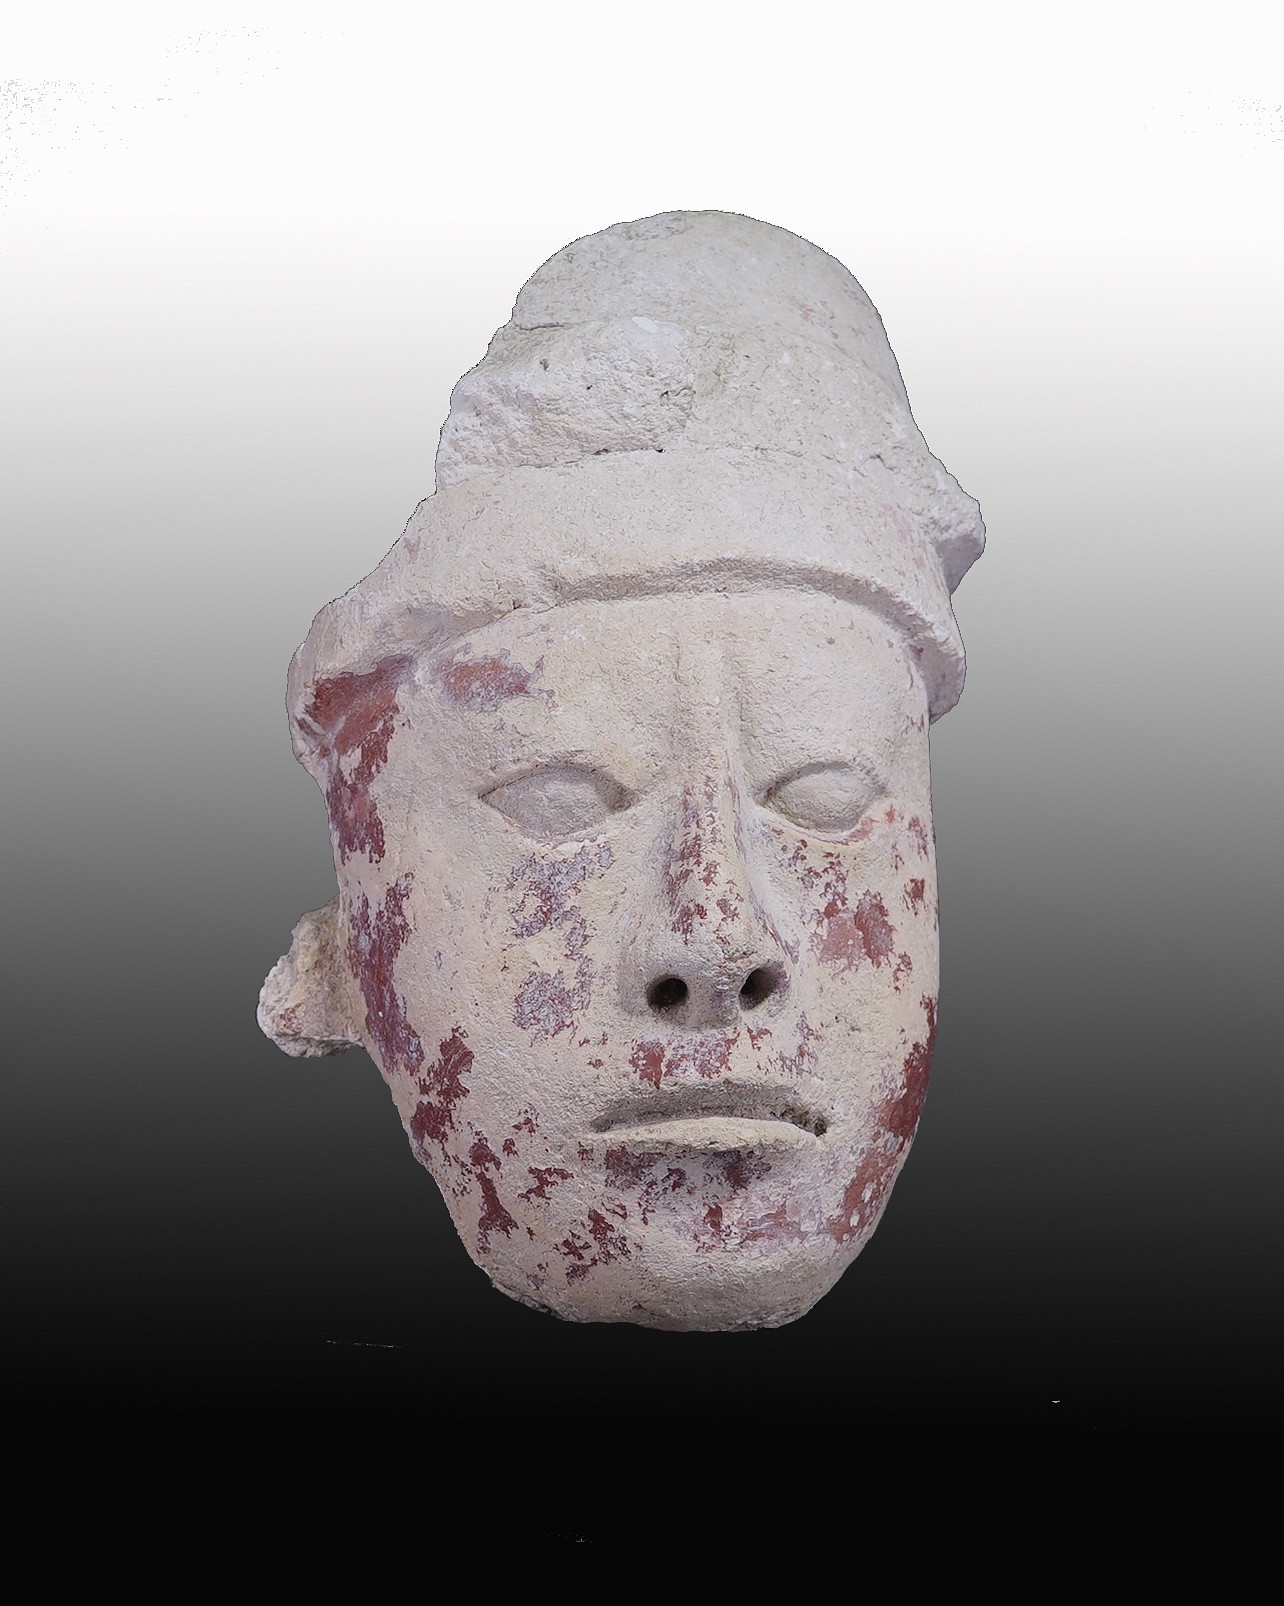 Mexico, Mayan Stucco Face of a Ruler
This Mayan ruler wears stone headdress and has carefully crafted facial features.   It originates from Chiaps, Mexico, and was formerly in the collection of Hiroshi Miura in Tokyo, Japan, prior to 1970.
Media: Stone
Dimensions: Height: 11 1/2  x Width: 7"  Depth: 6 1/2"
$16,000
n3046